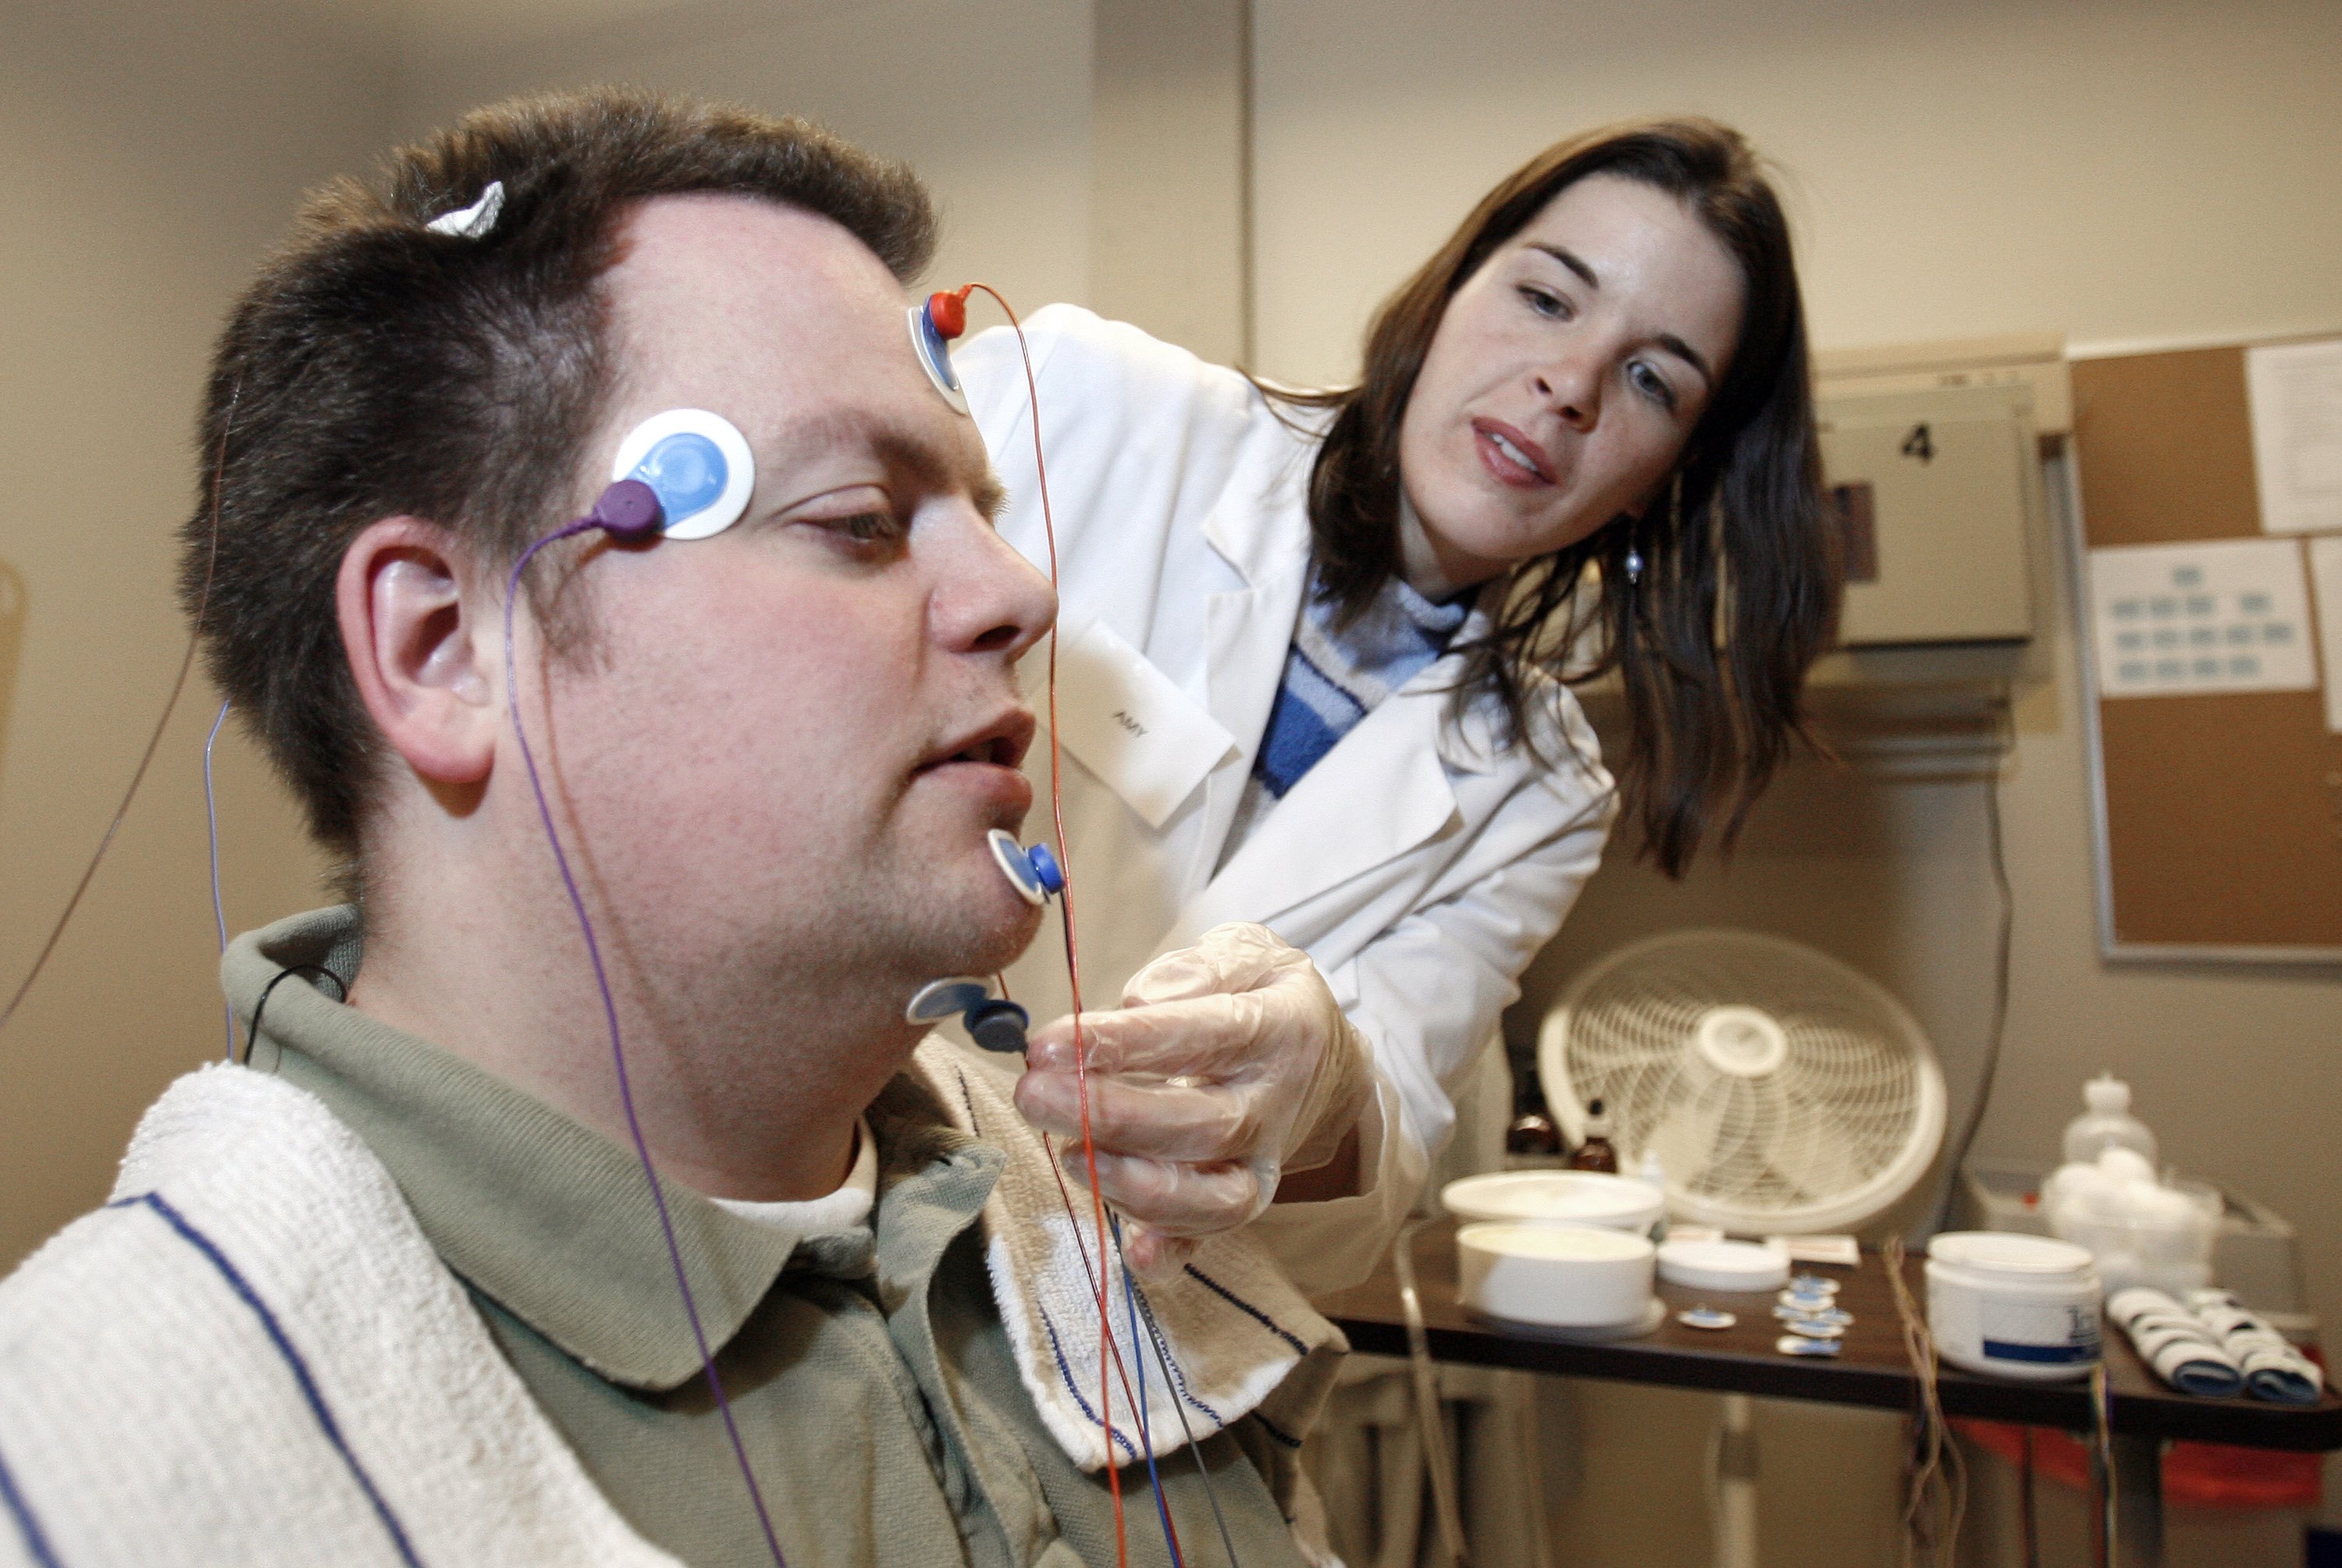 Ryan Gamble has wires applied to his head by lab technologist Amy Bender in preparation for a polysomnographic recording system demonstration at Washington State University Spokane's Sleep and Performance Research Center December 13, 2006 in Spokane, Washington. (Jeff T. Green&mdash;Getty Images)